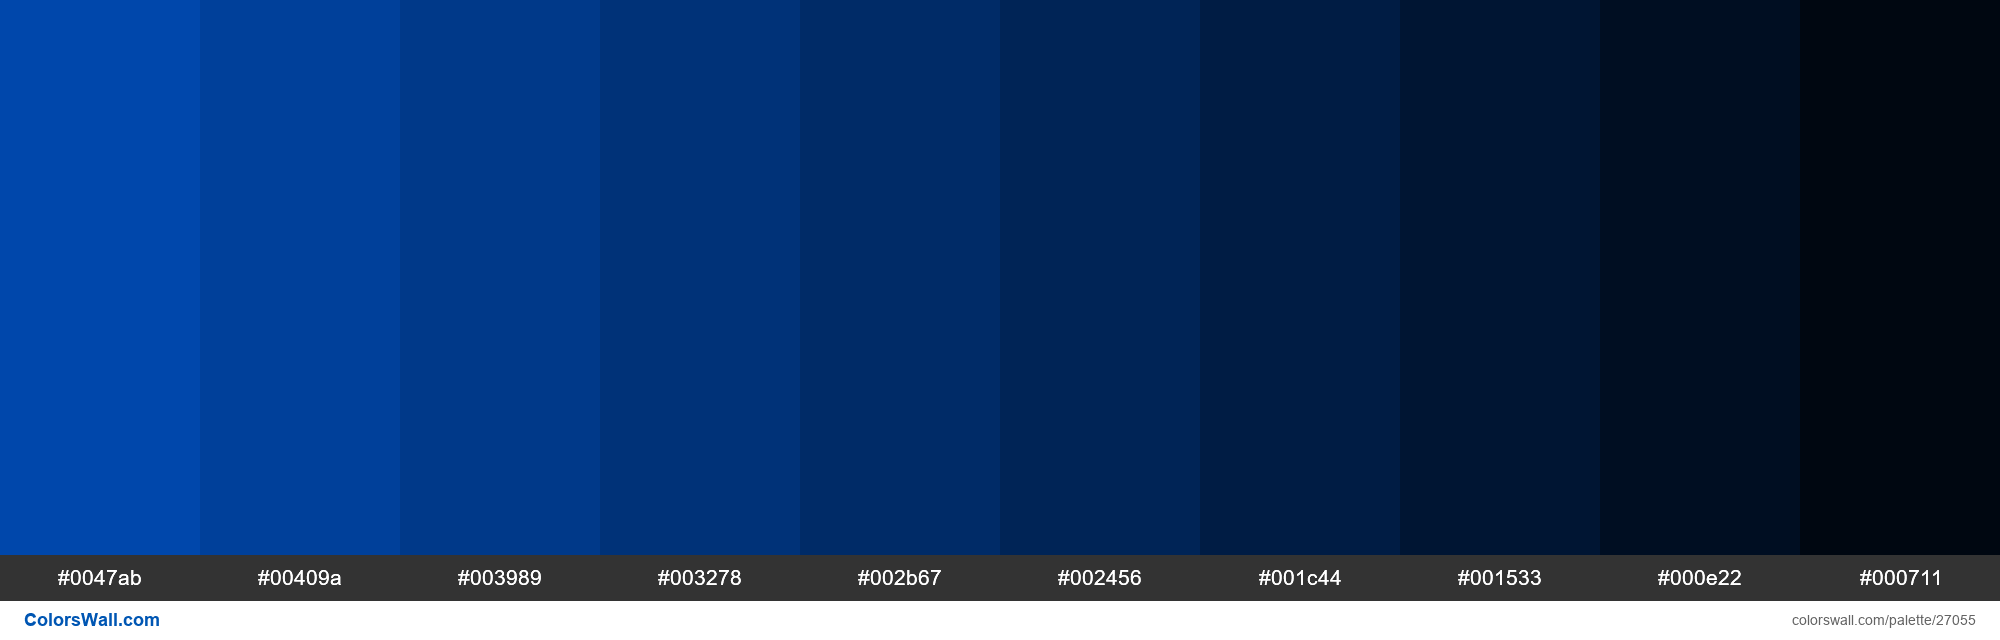 Shades of Cobalt color #0047AB hex | ColorsWall